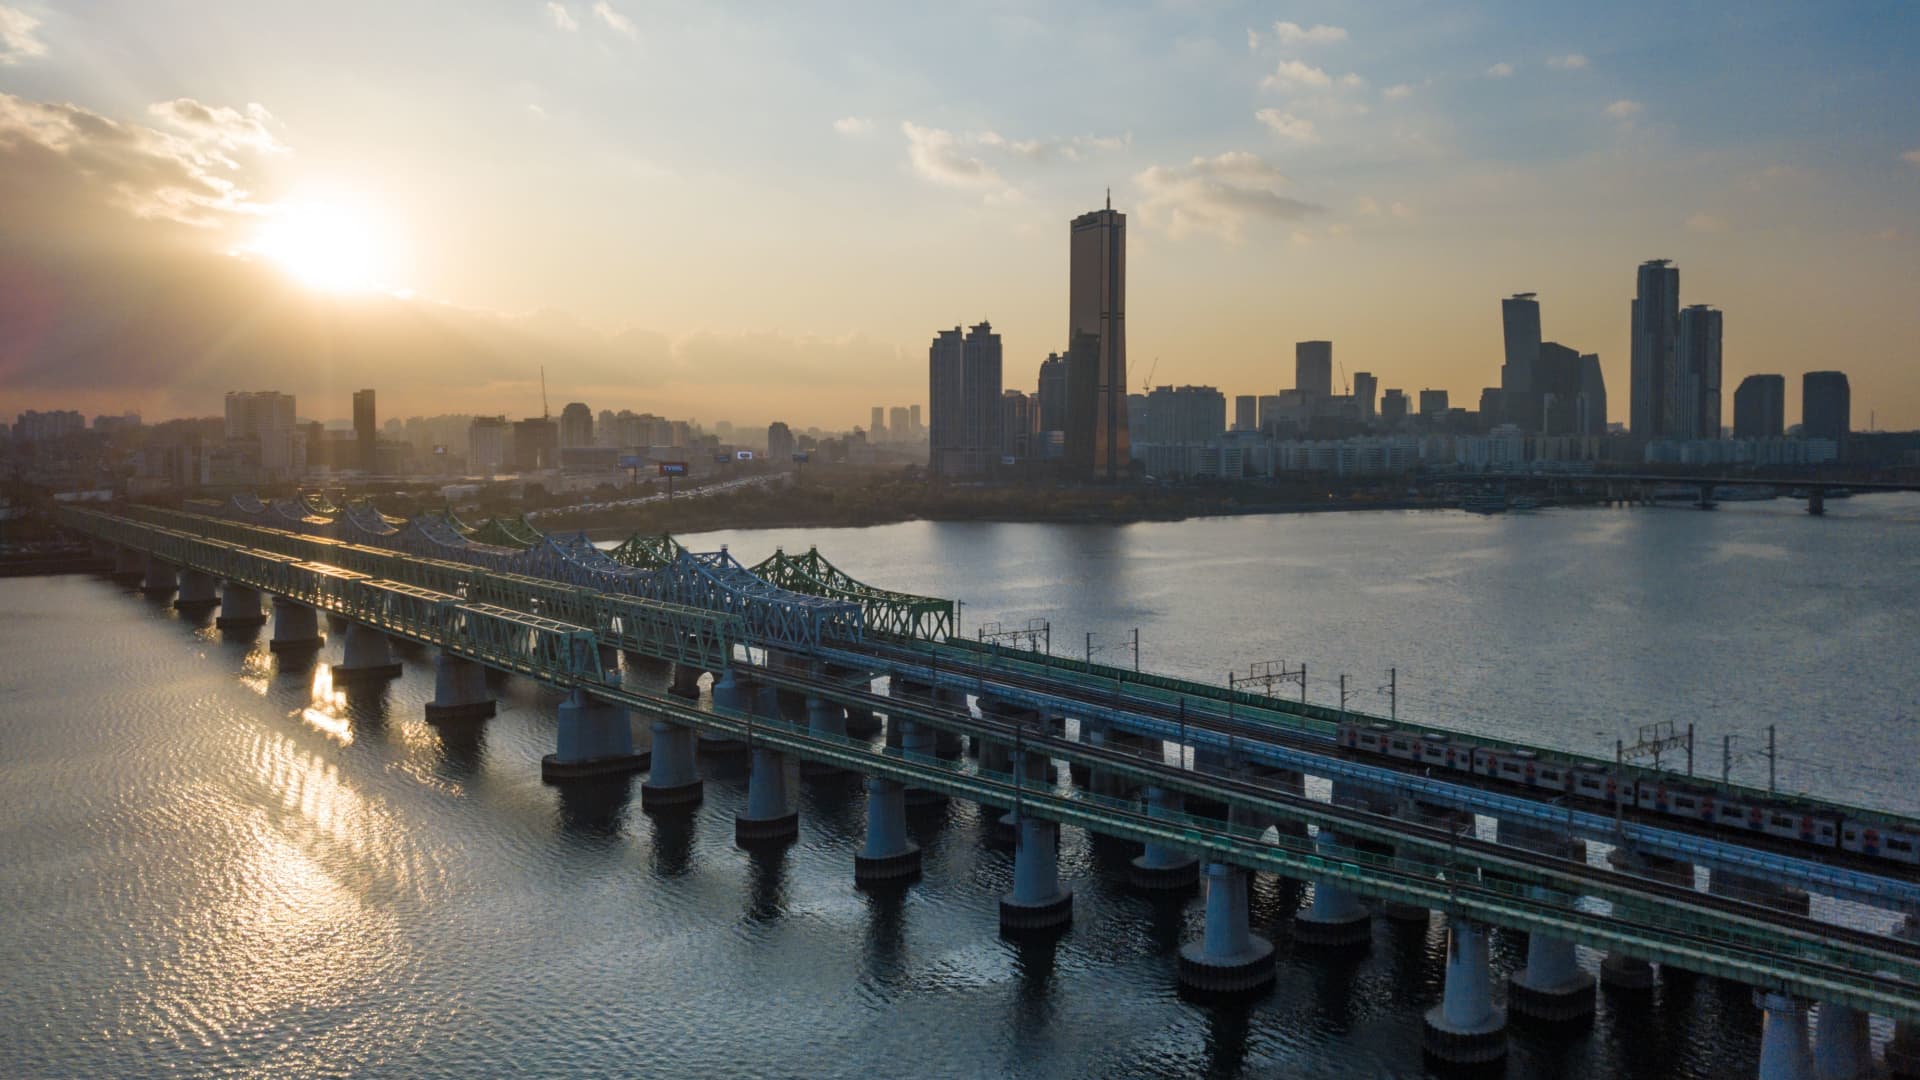 In a photo taken on November 4, 2019 a subway train crosses a rail bridge over the Han river, before the skyline of the Yeouido business district of Seoul.